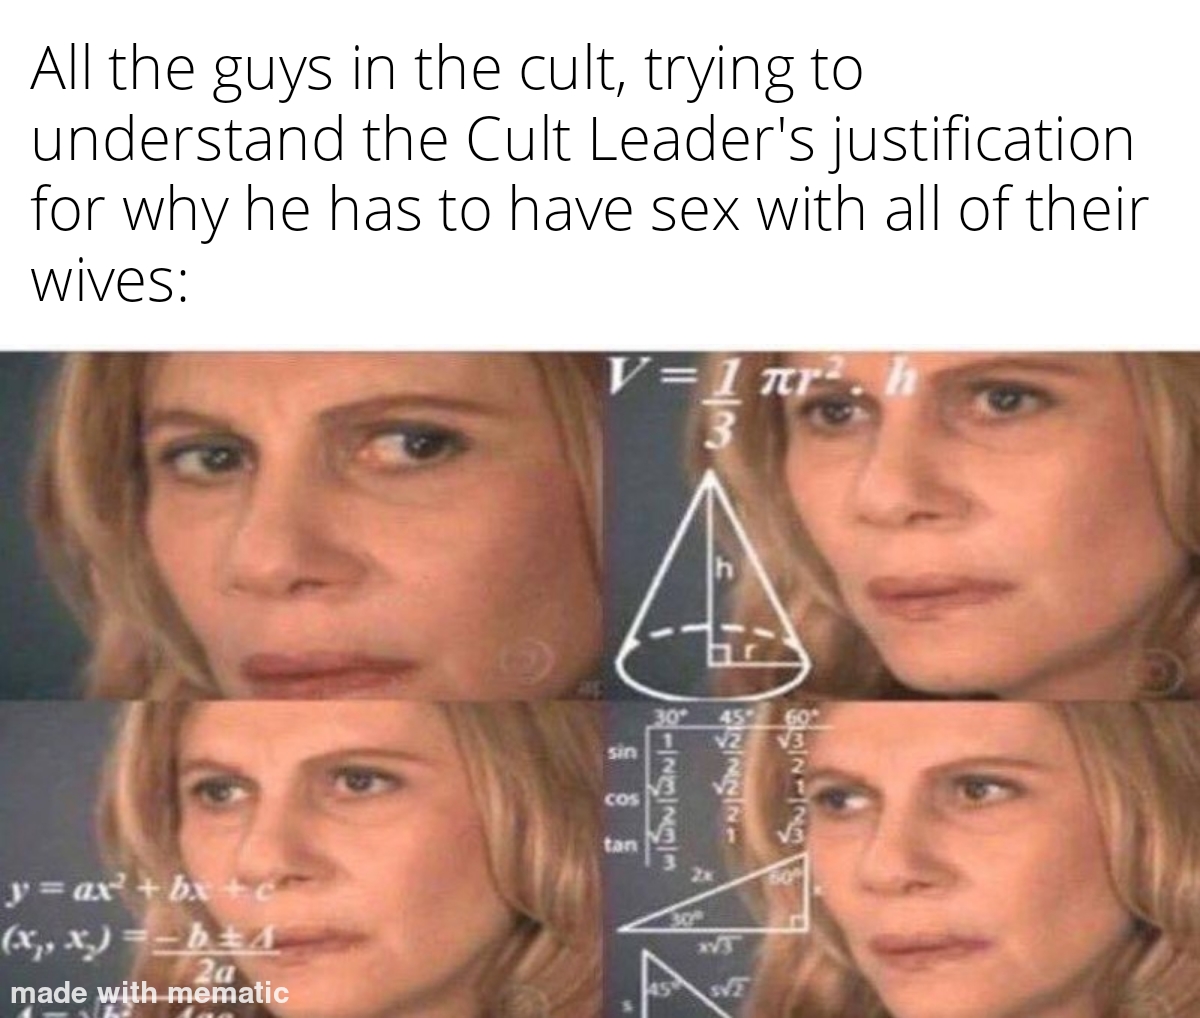 dank memes - funny memes - ww2 m3 meme - All the guys in the cult, trying to understand the Cult Leader's justification for why he has to have sex with all of their wives V1 ar 3 A San Annin Tenen Cos tan y ax? b x, X b 20 made with mematic